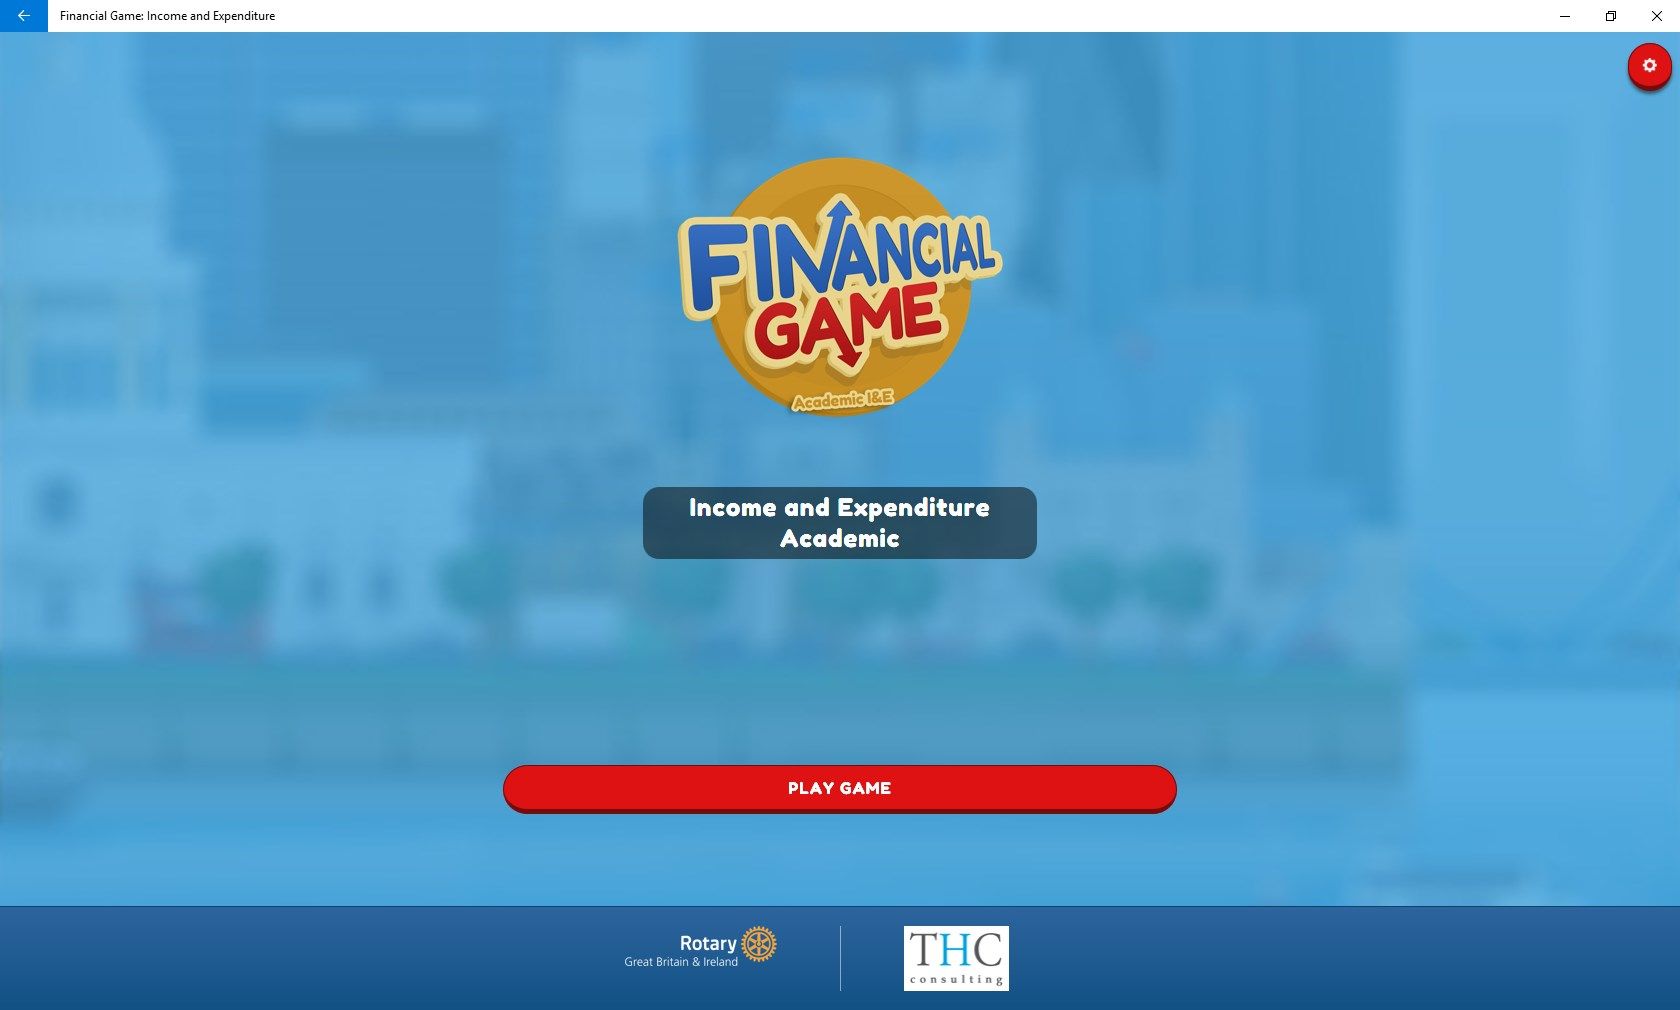 The Financial Game: Income and Expenditure